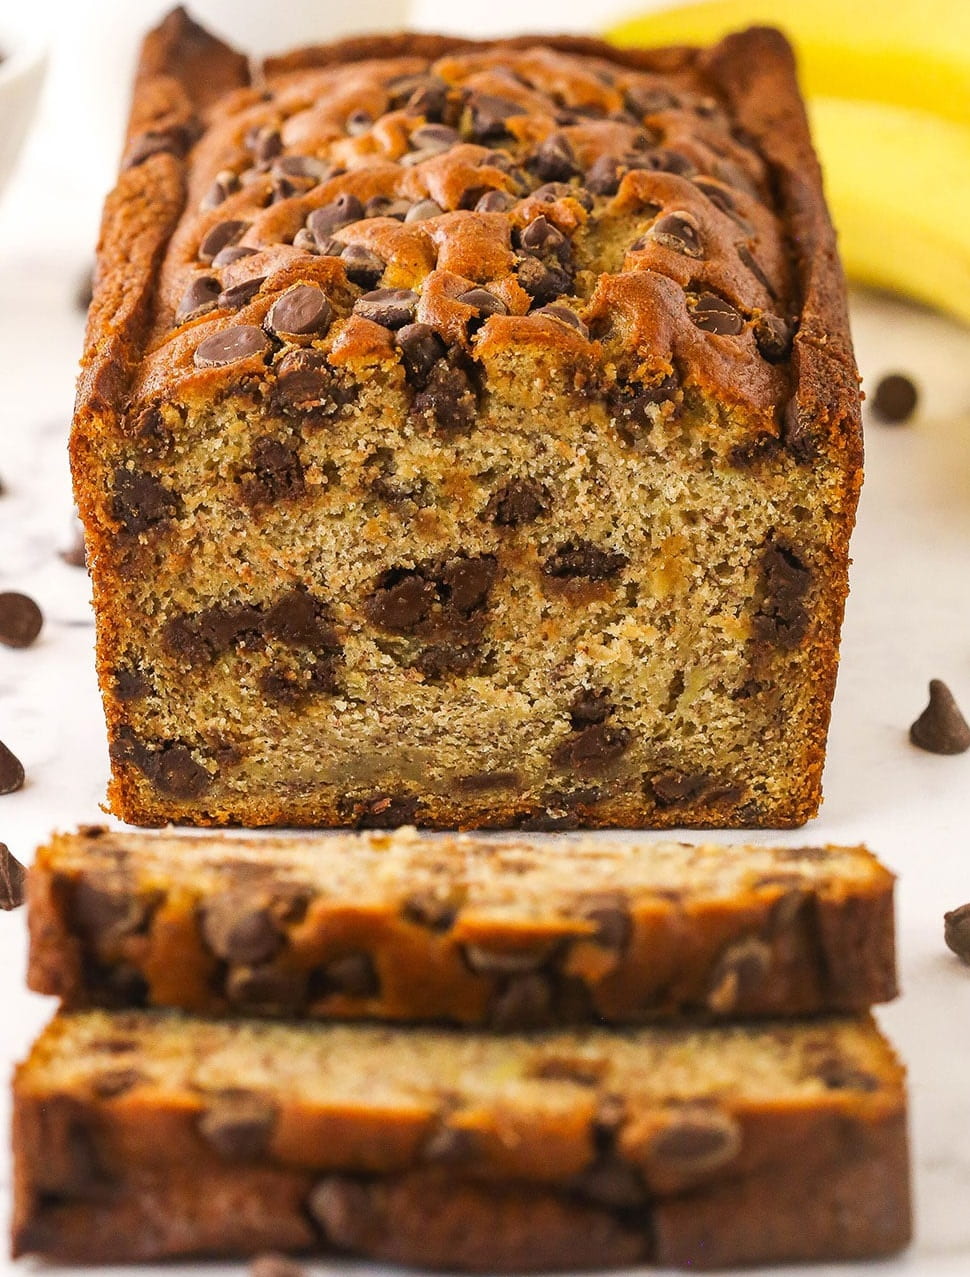 Banana bread loaf with two slices cut from the end and laid flat; chocolate chips visible in the bread and next to the bread; bananas in background; bread on a white table